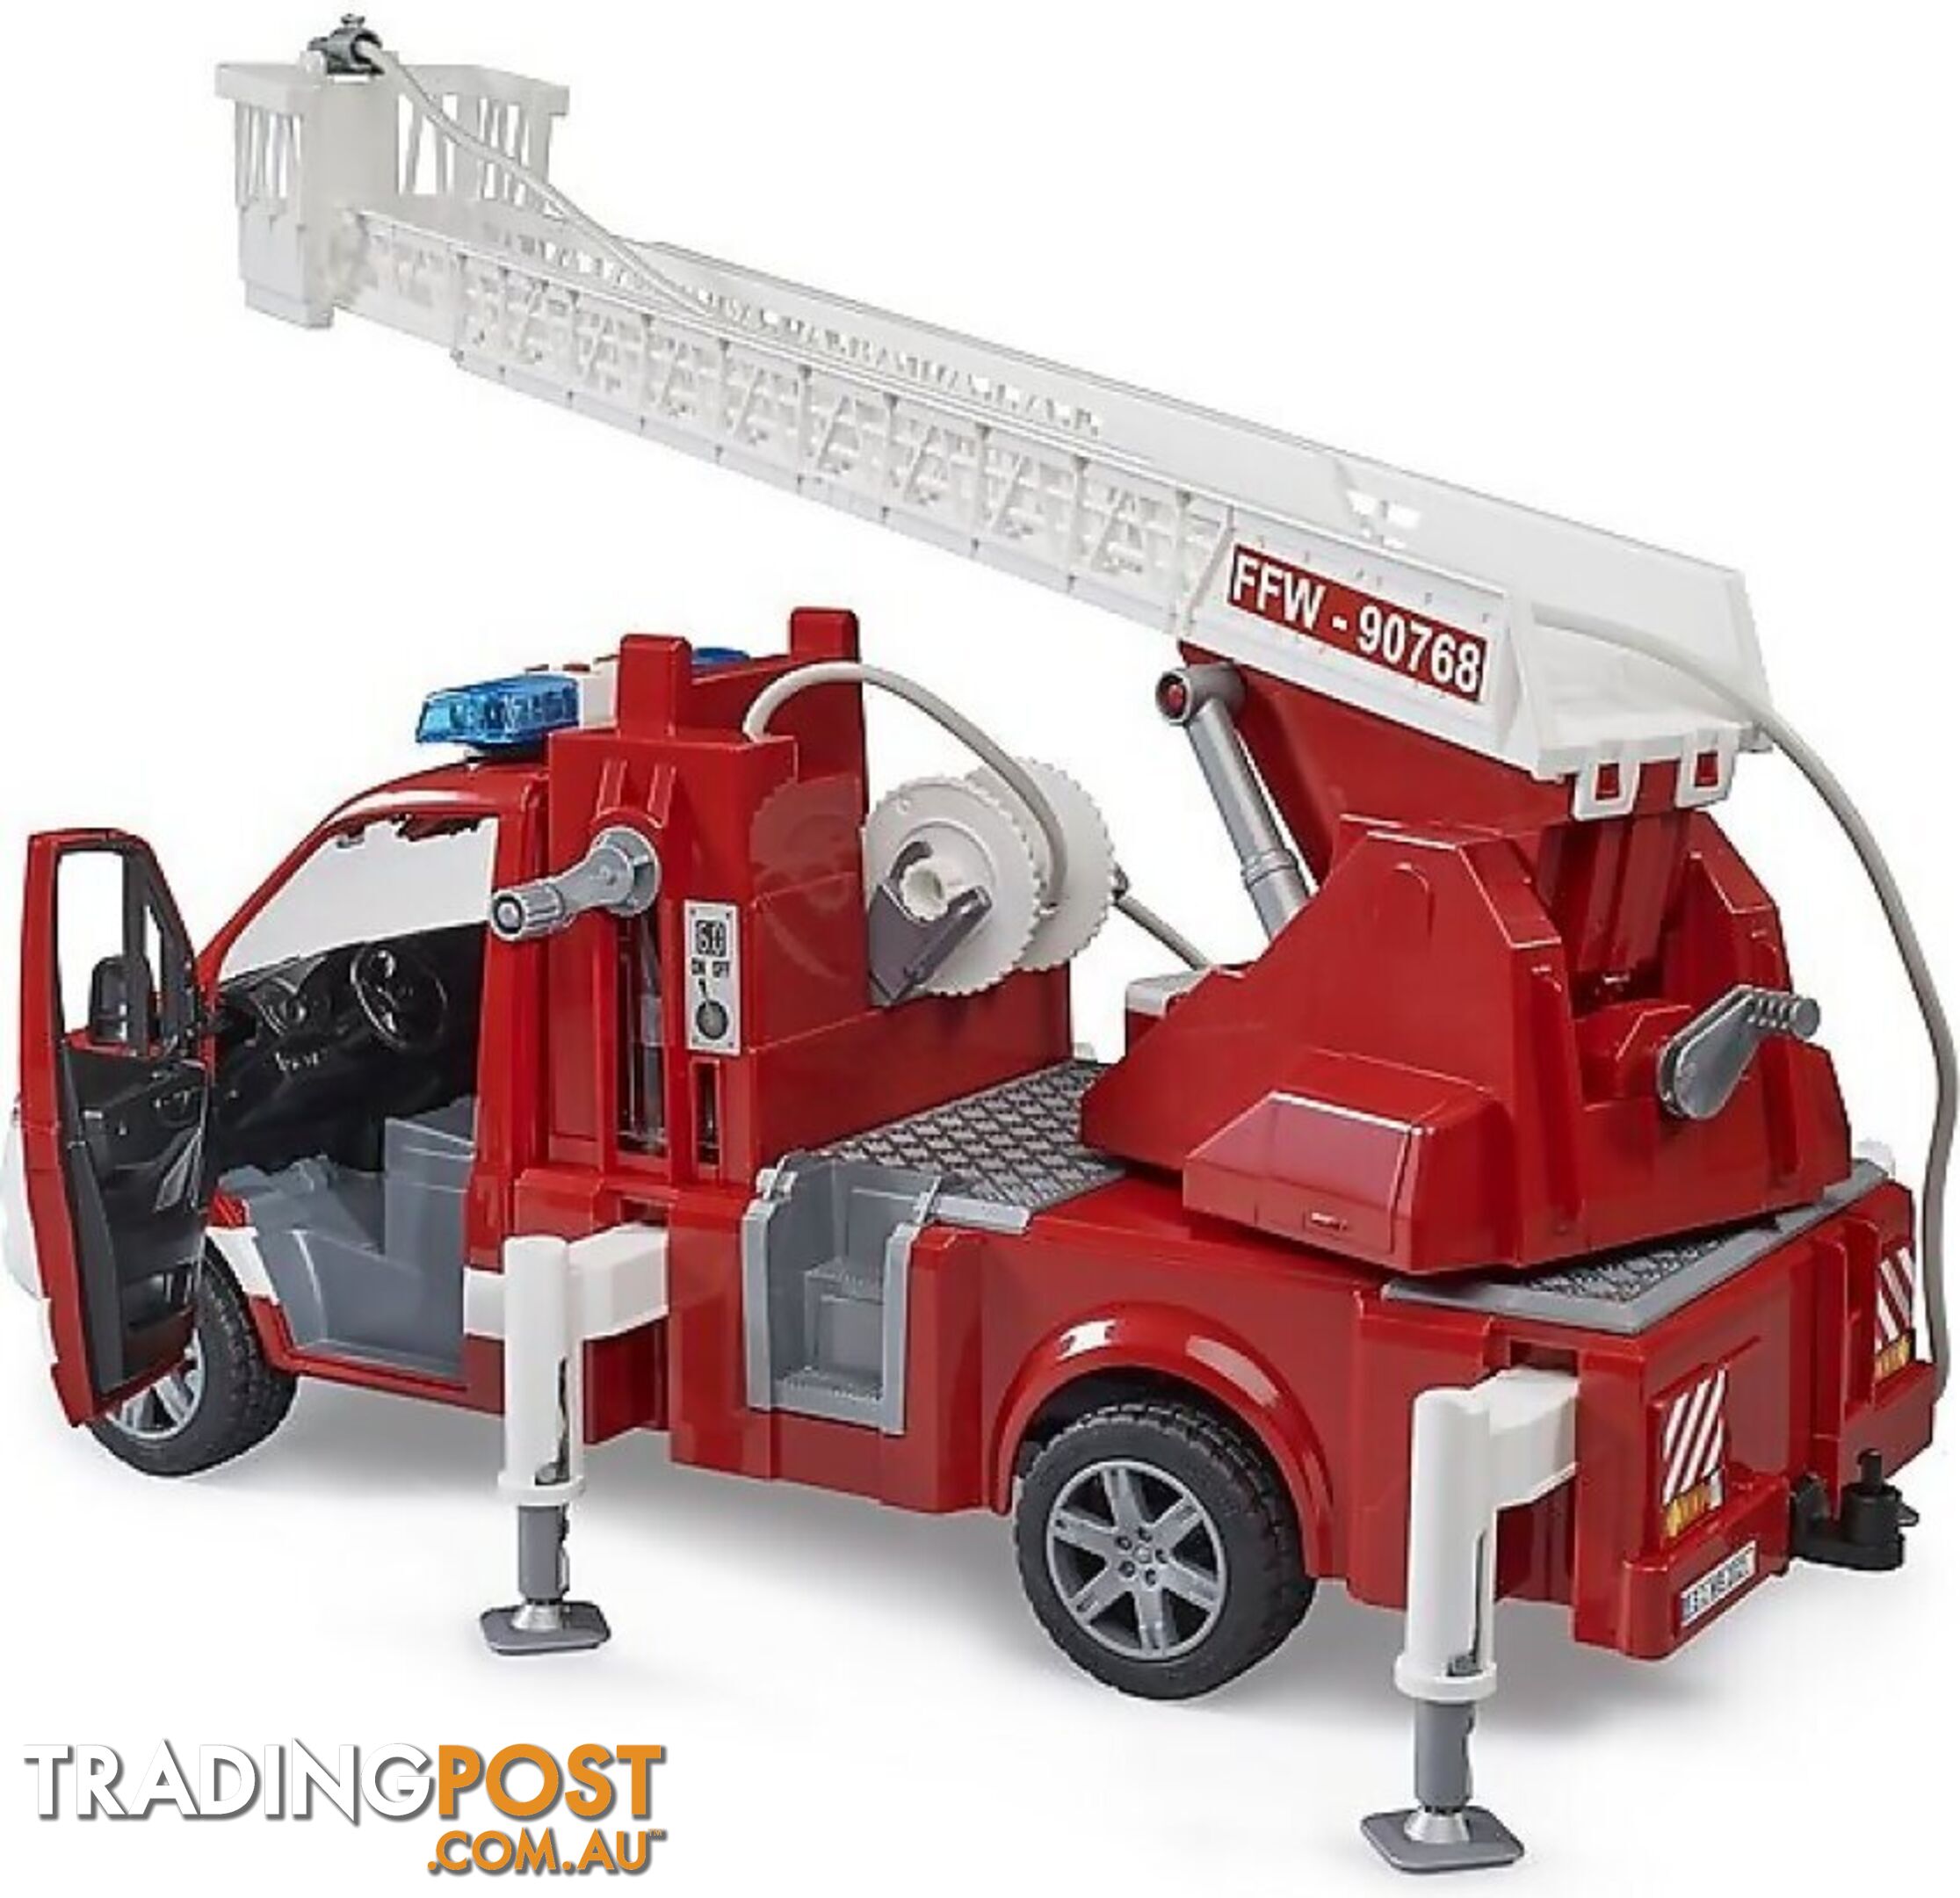 Bruder Mercedes Benz Sprinter Fire Engine With Slewing Ladder And Water Pump 1:16 Scale - Zi24002532 - 4001702025328